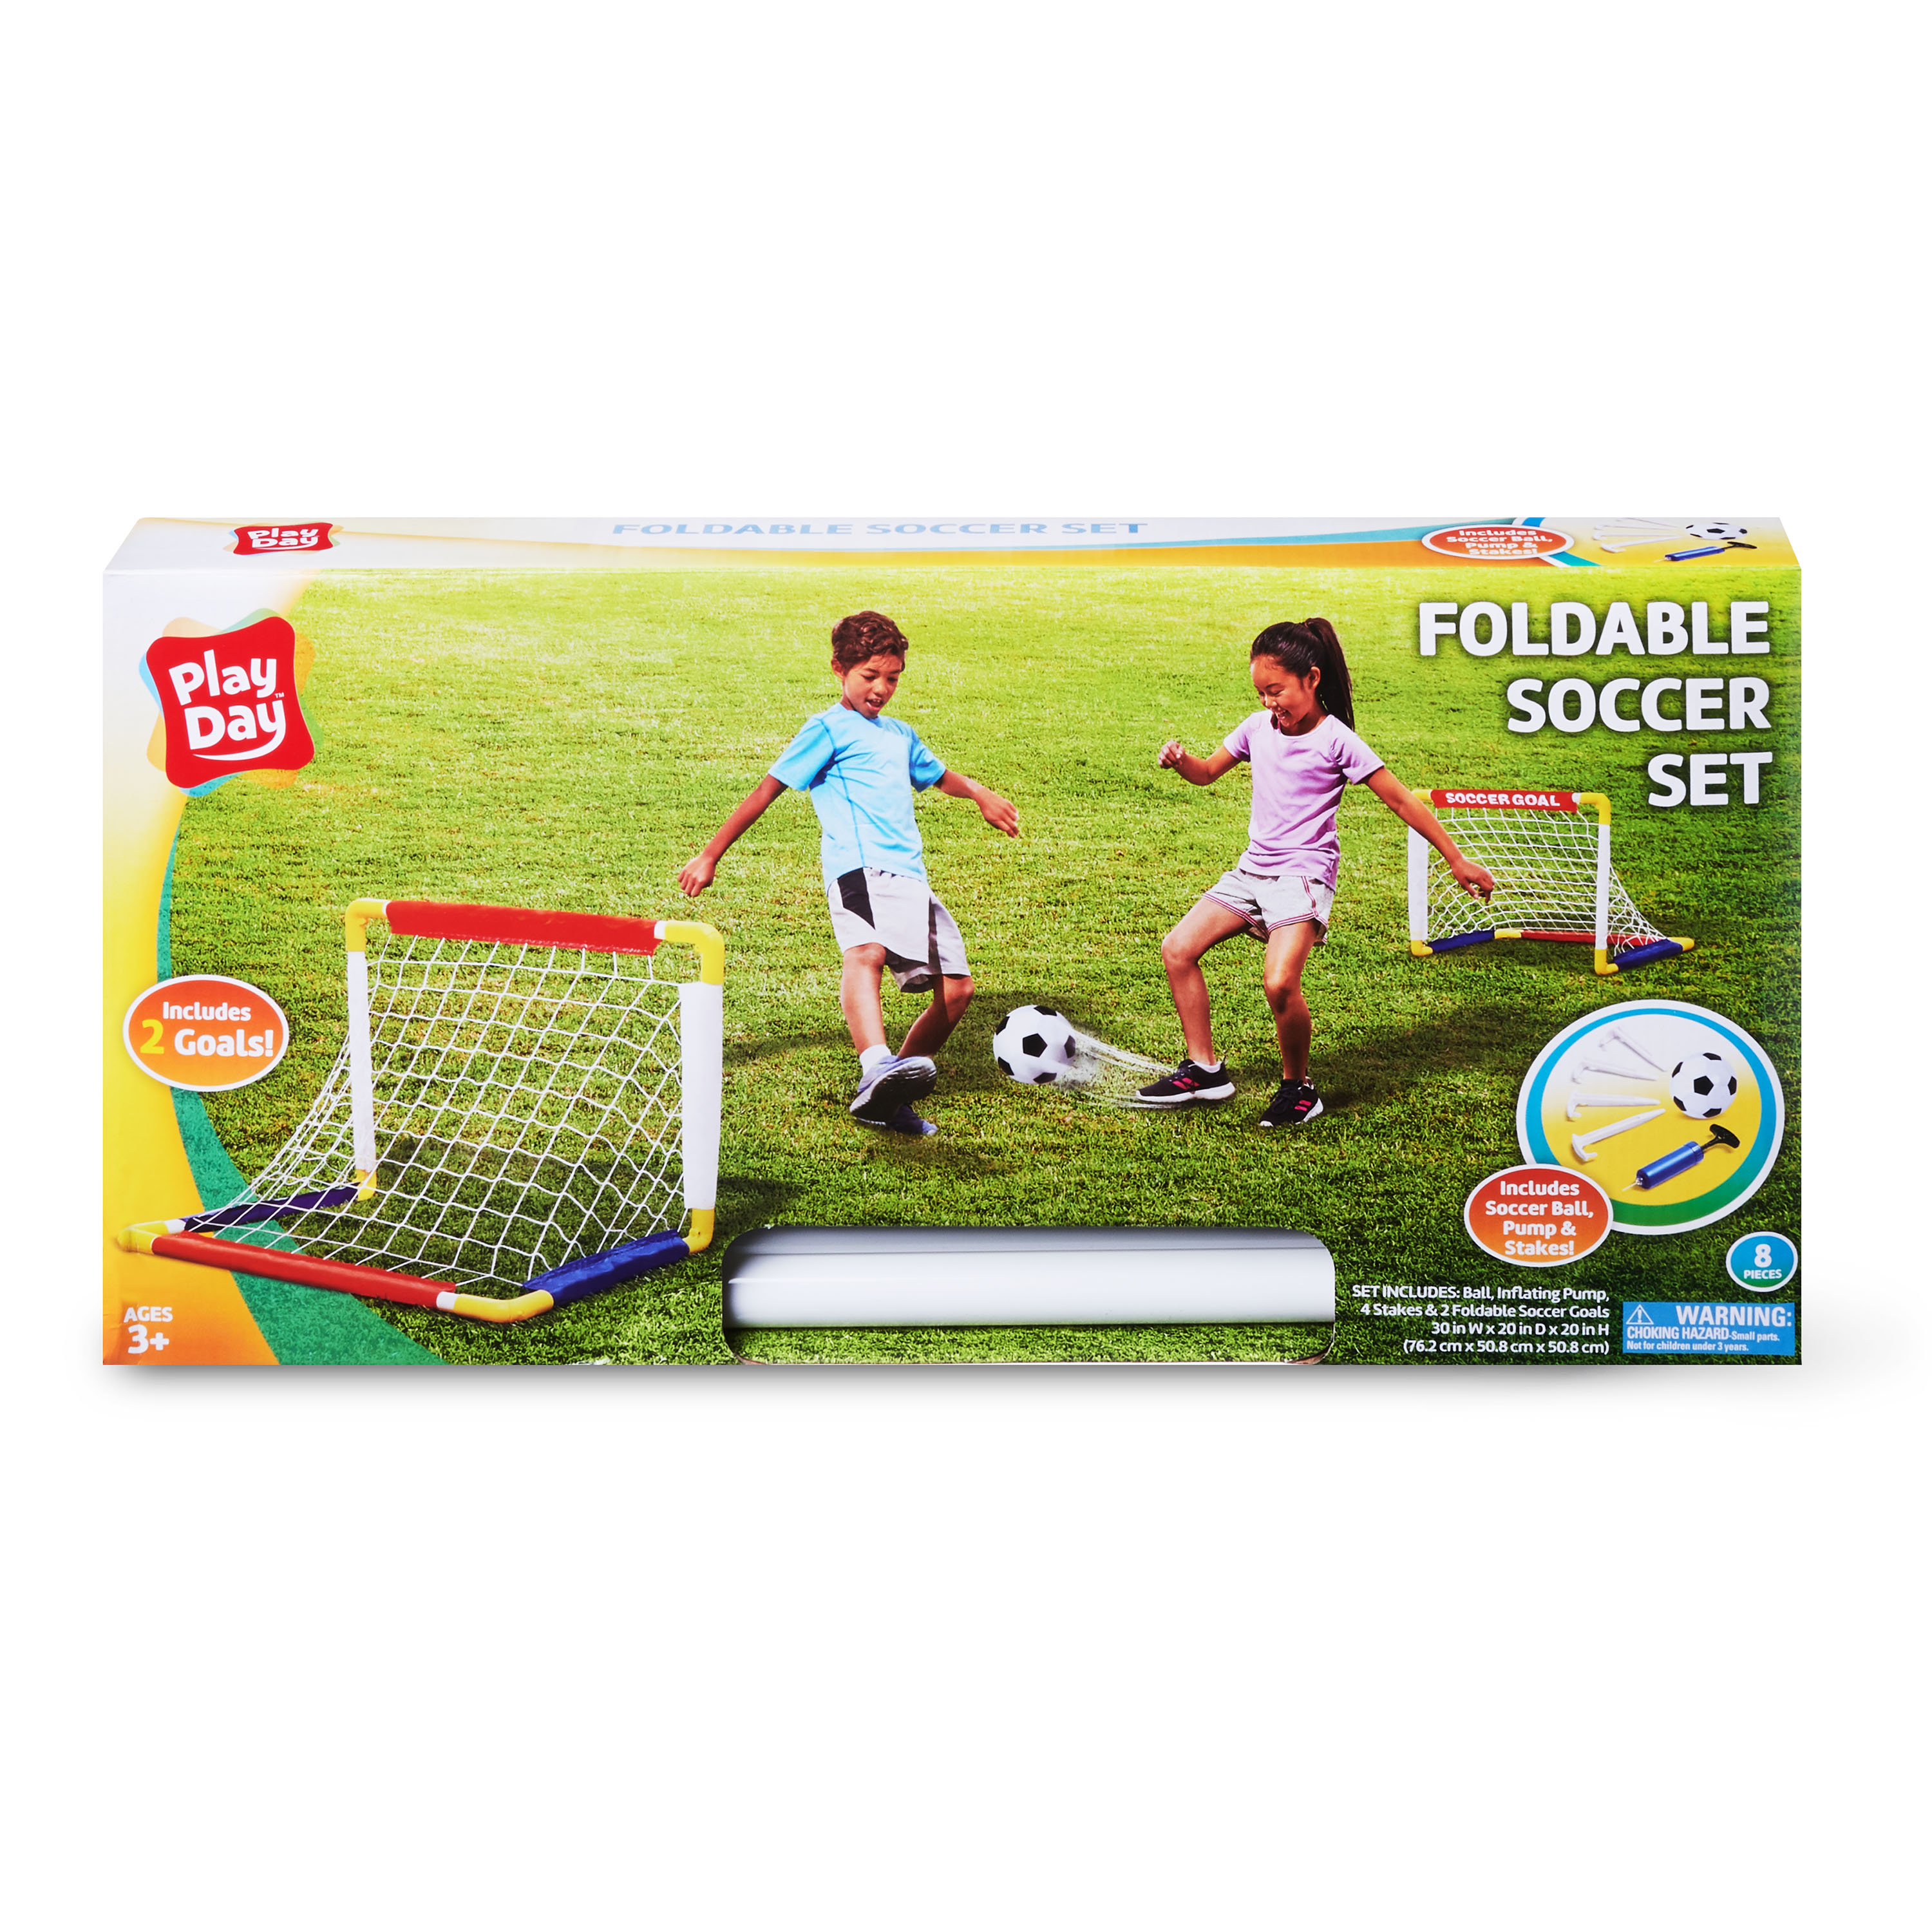 Play Day Foldable Soccer Set, Beginner Sports Soccer Game, Children Ages 3+ - image 3 of 6